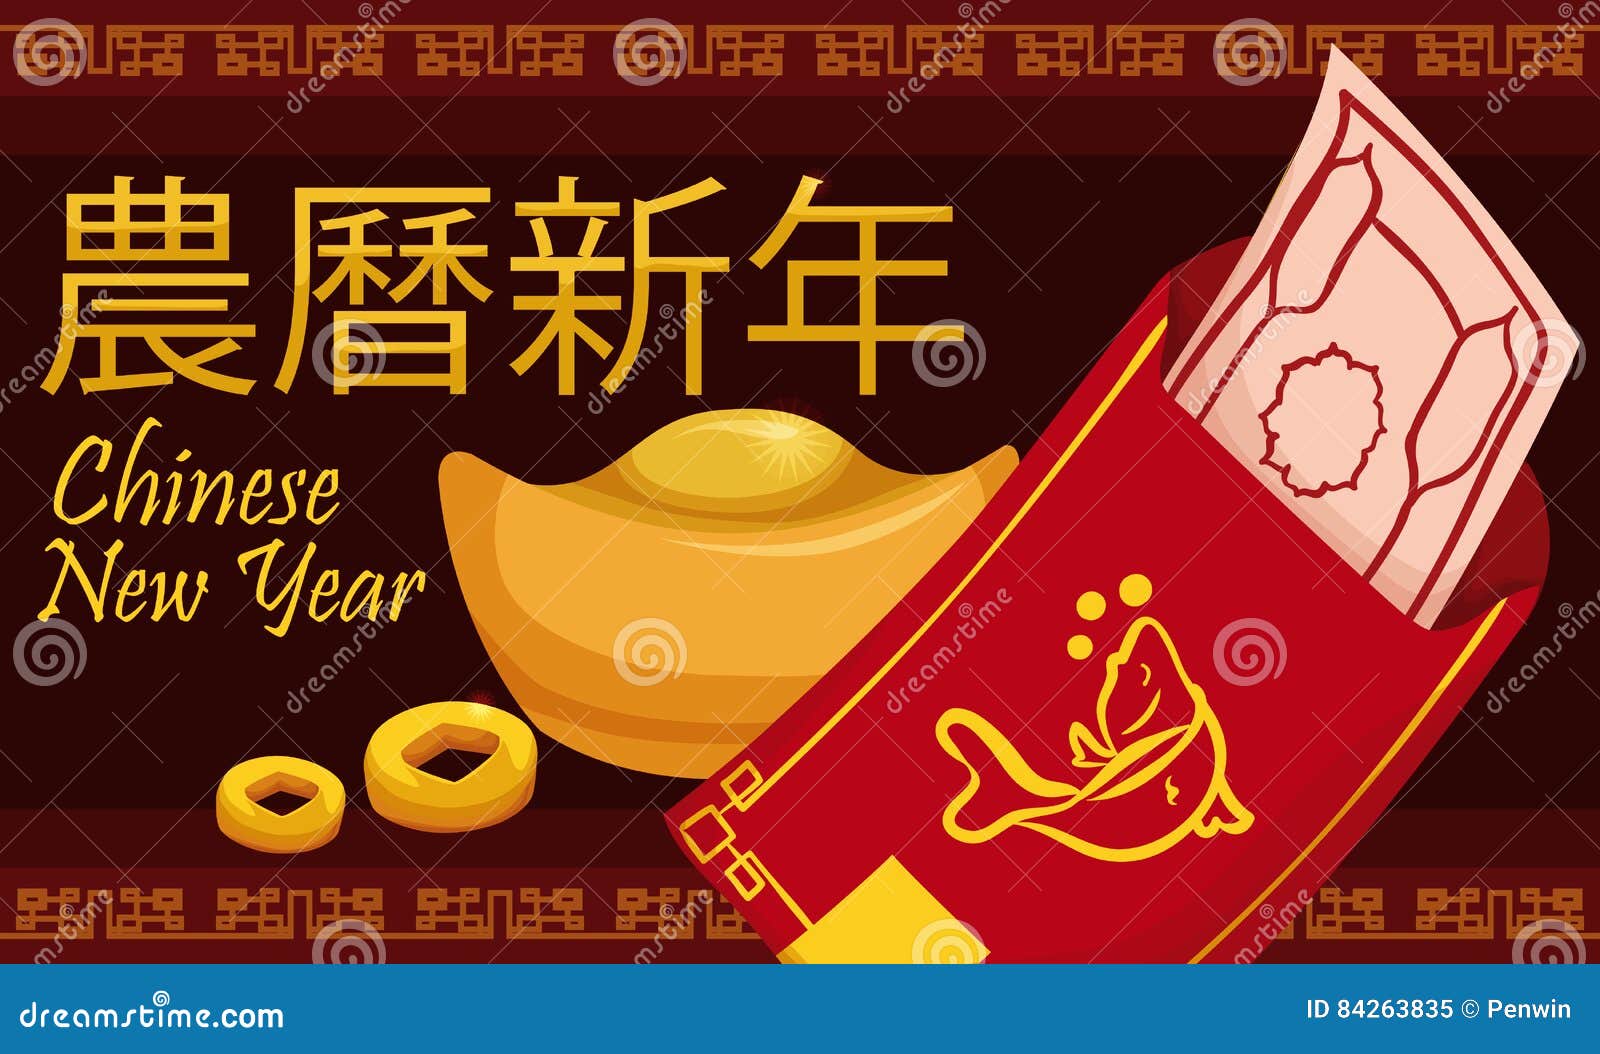 Red Envelope, Ingot and Coins for Chinese New Year, Vector Illustration  Stock Vector - Illustration of culture, fortune: 84263835